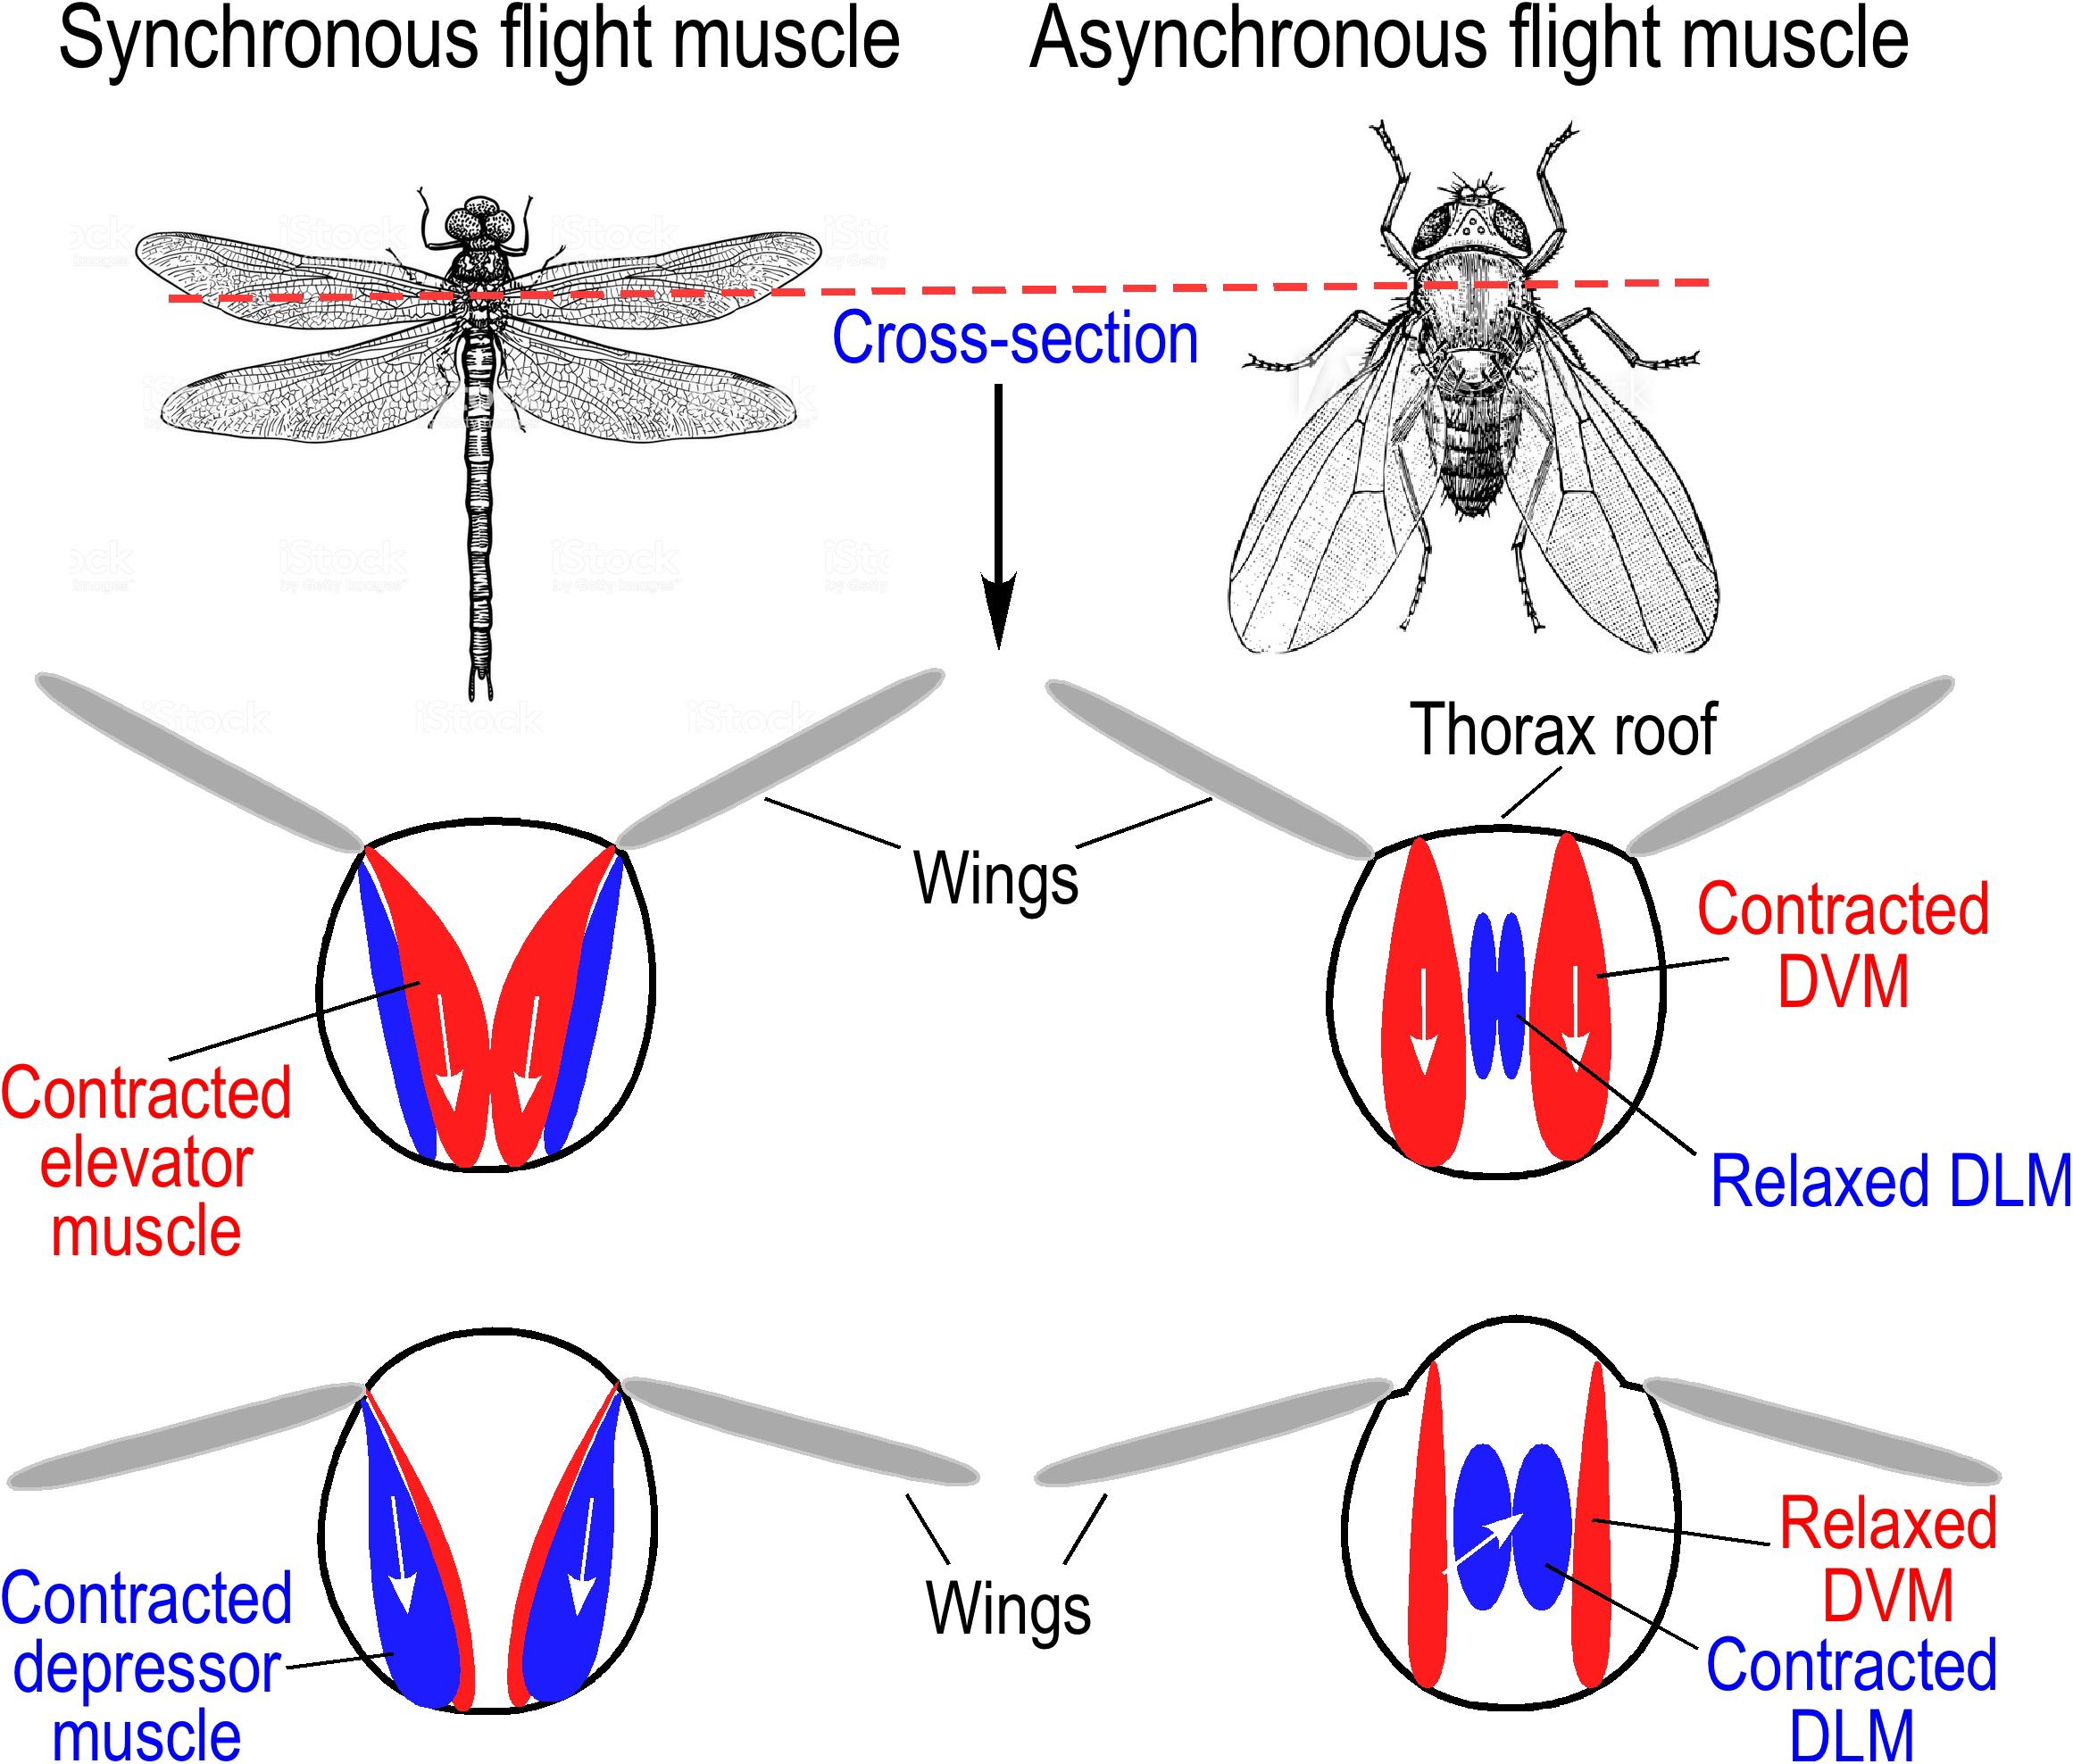 Frontiers | Evolution of Flight Muscle Contractility and Energetic ...